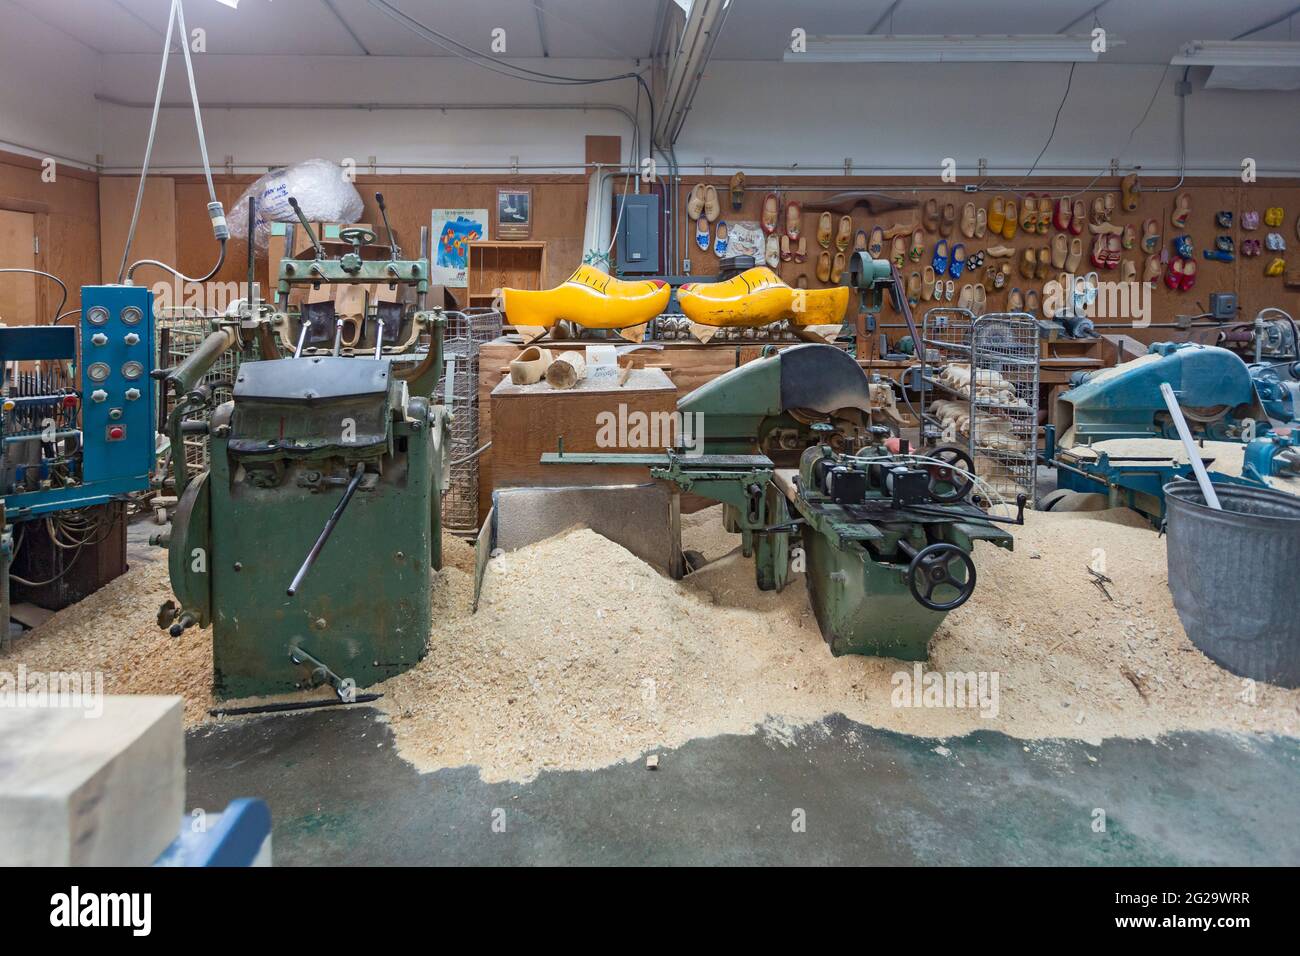 Holland, Michigan - The wooden shoe workshop at the De Klomp Wooden Shoe and Delft Factory, part of the Veldheer Tulip Farm. The city's Dutch heritage Stock Photo